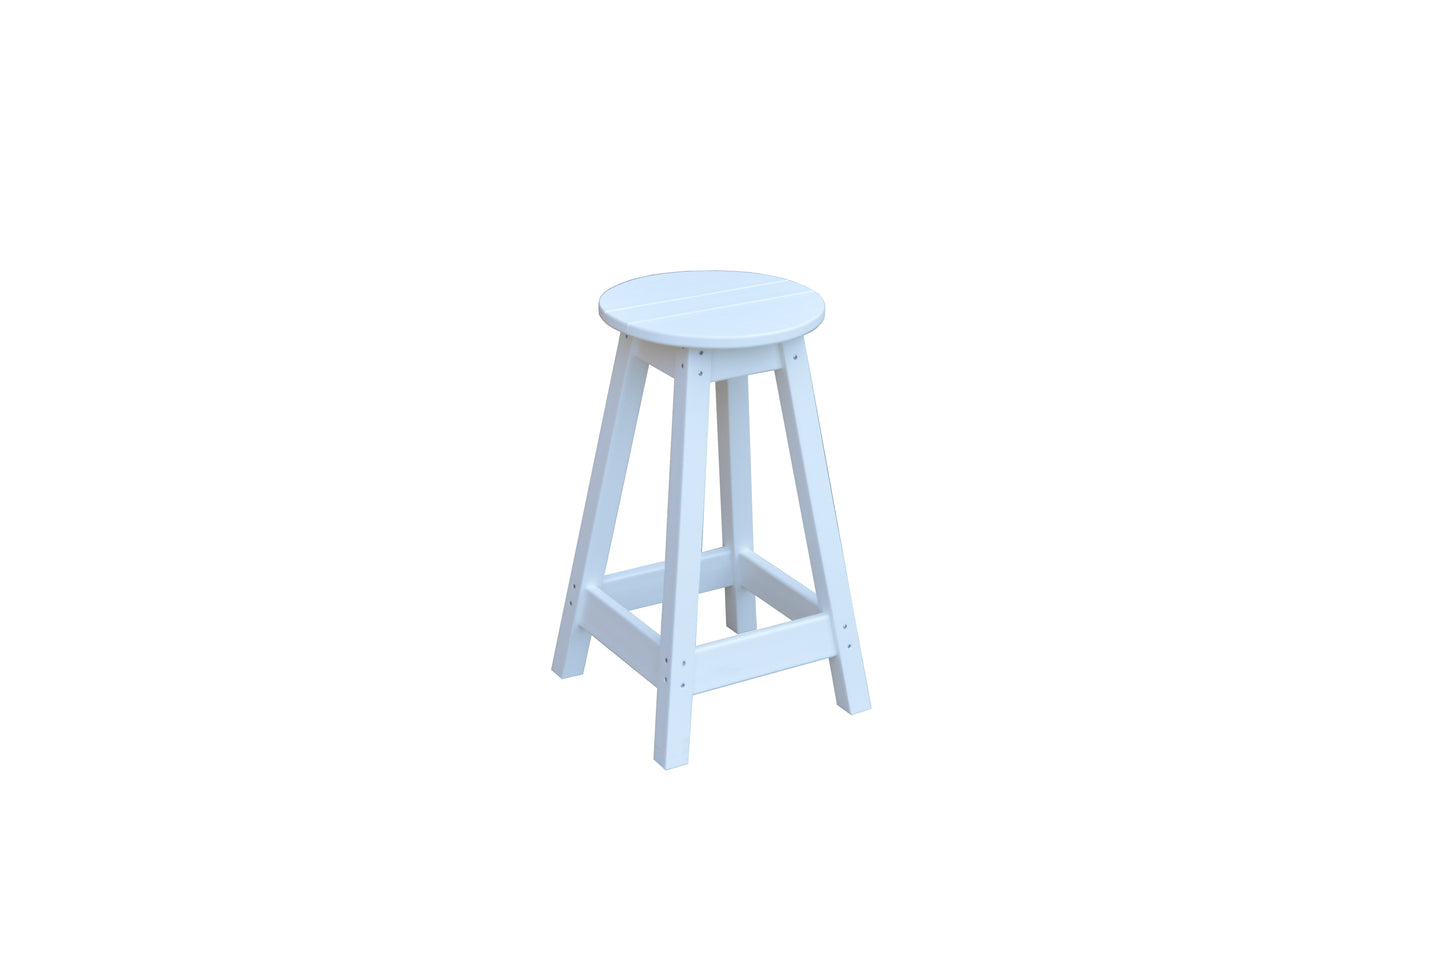 A&L Furniture Co. Recycled Plastic Round Stool (Counter Height) - LEAD TIME TO SHIP 10 BUSINESS DAYS